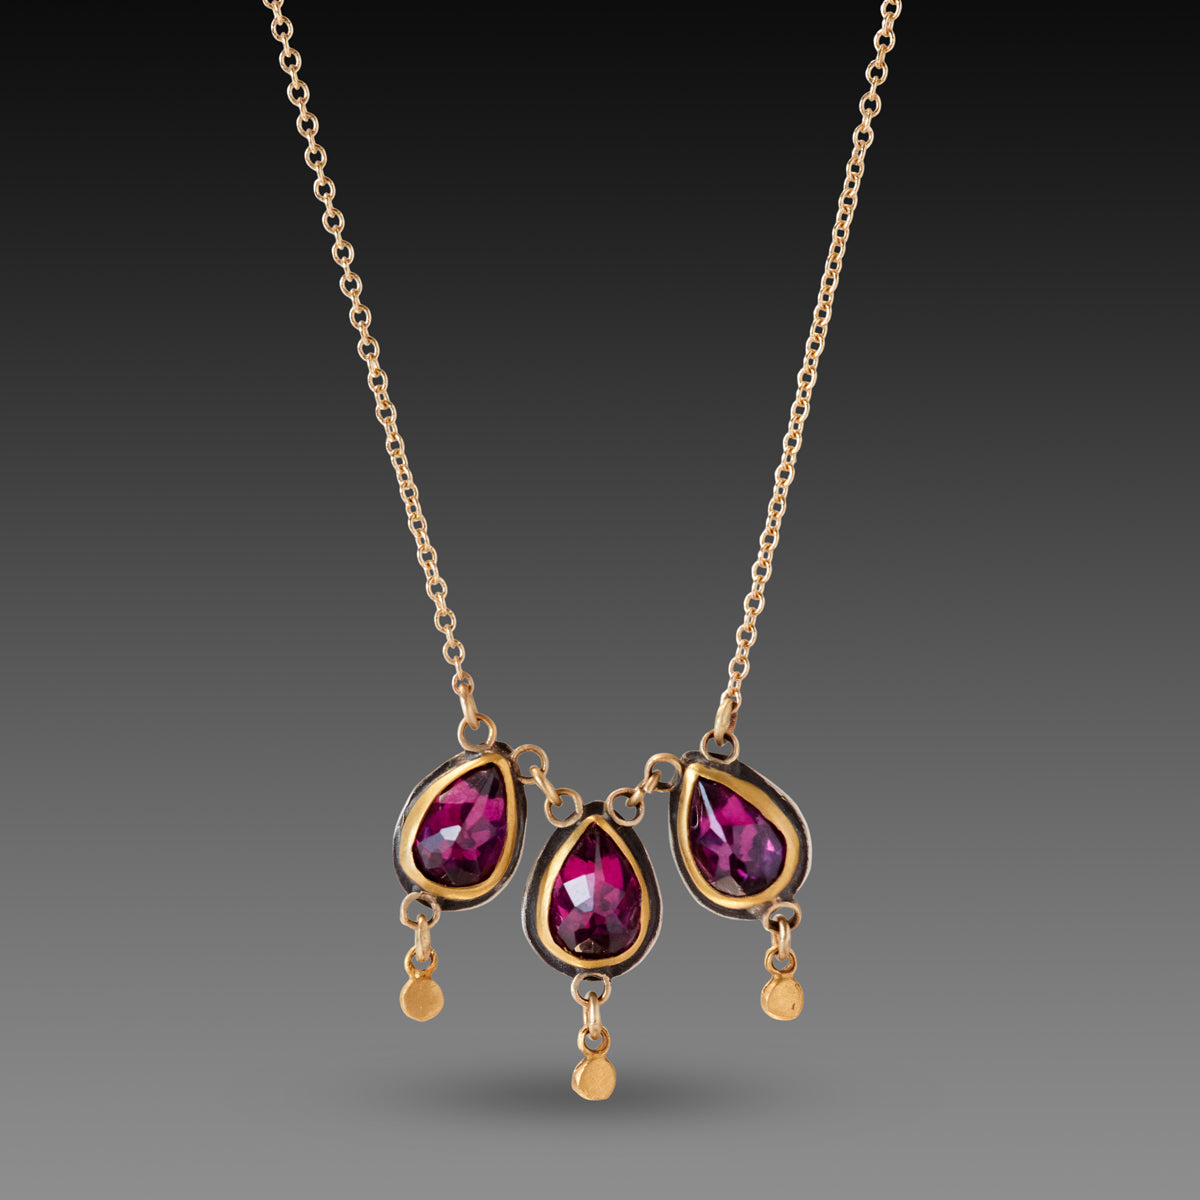 Antique Yellow Gold Hessonite Garnet Rivière Necklace | Fred Leighton